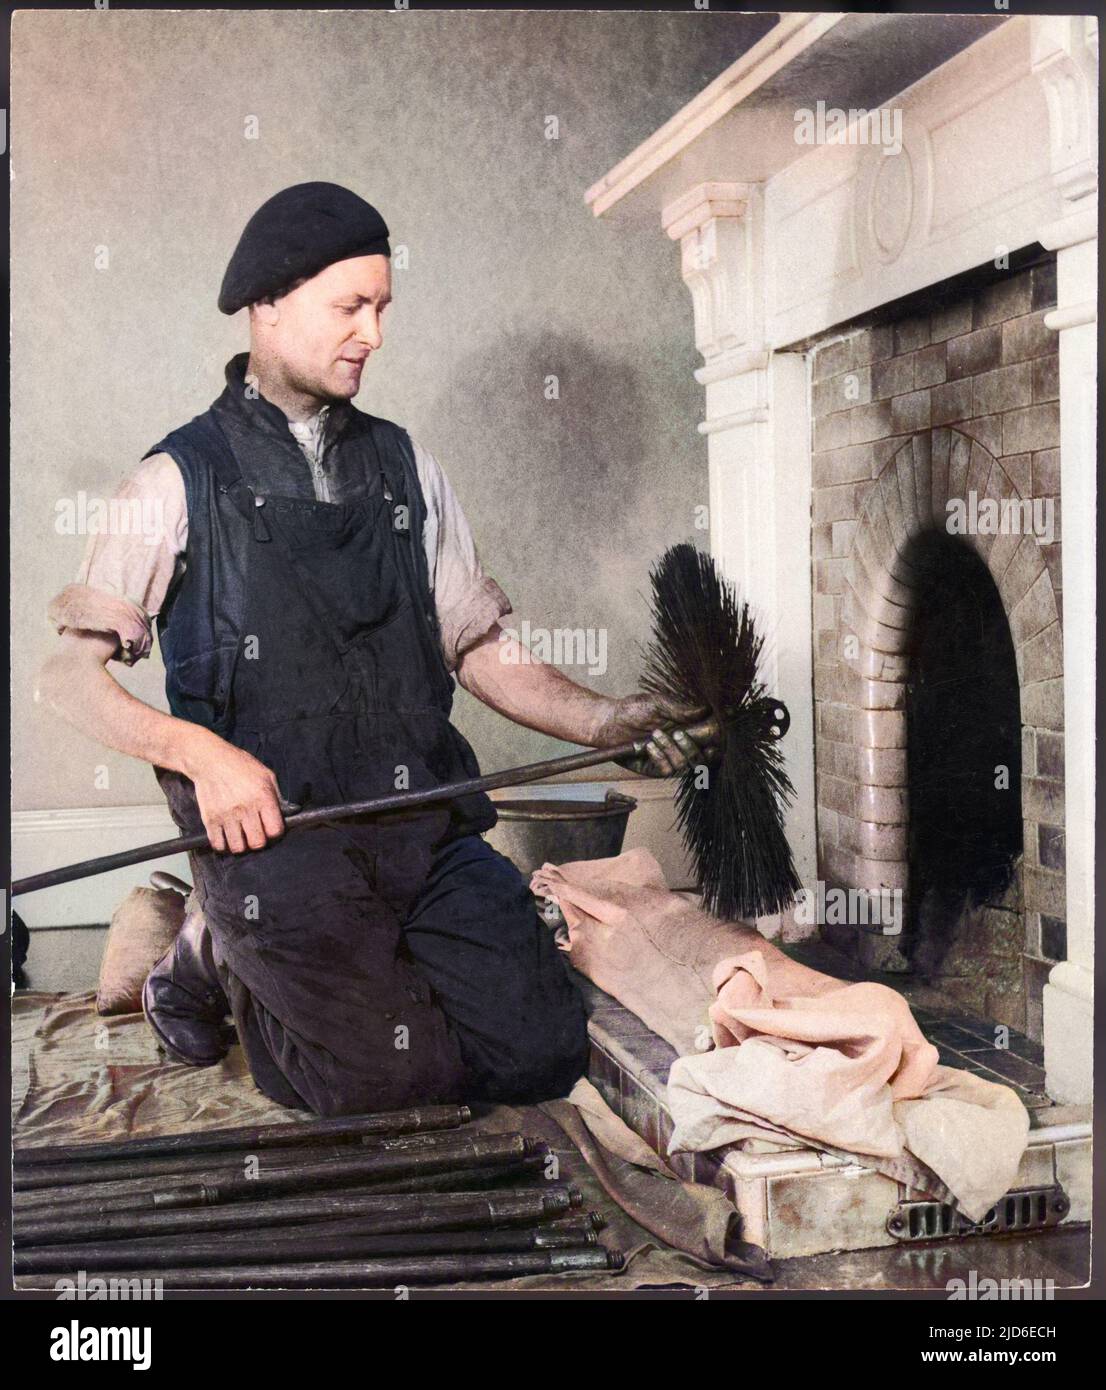 A chimney sweep kneels on the hearth and prepares to insert his brush up the chimney. Colourised version of : 10108873       Date: 1940s Stock Photo